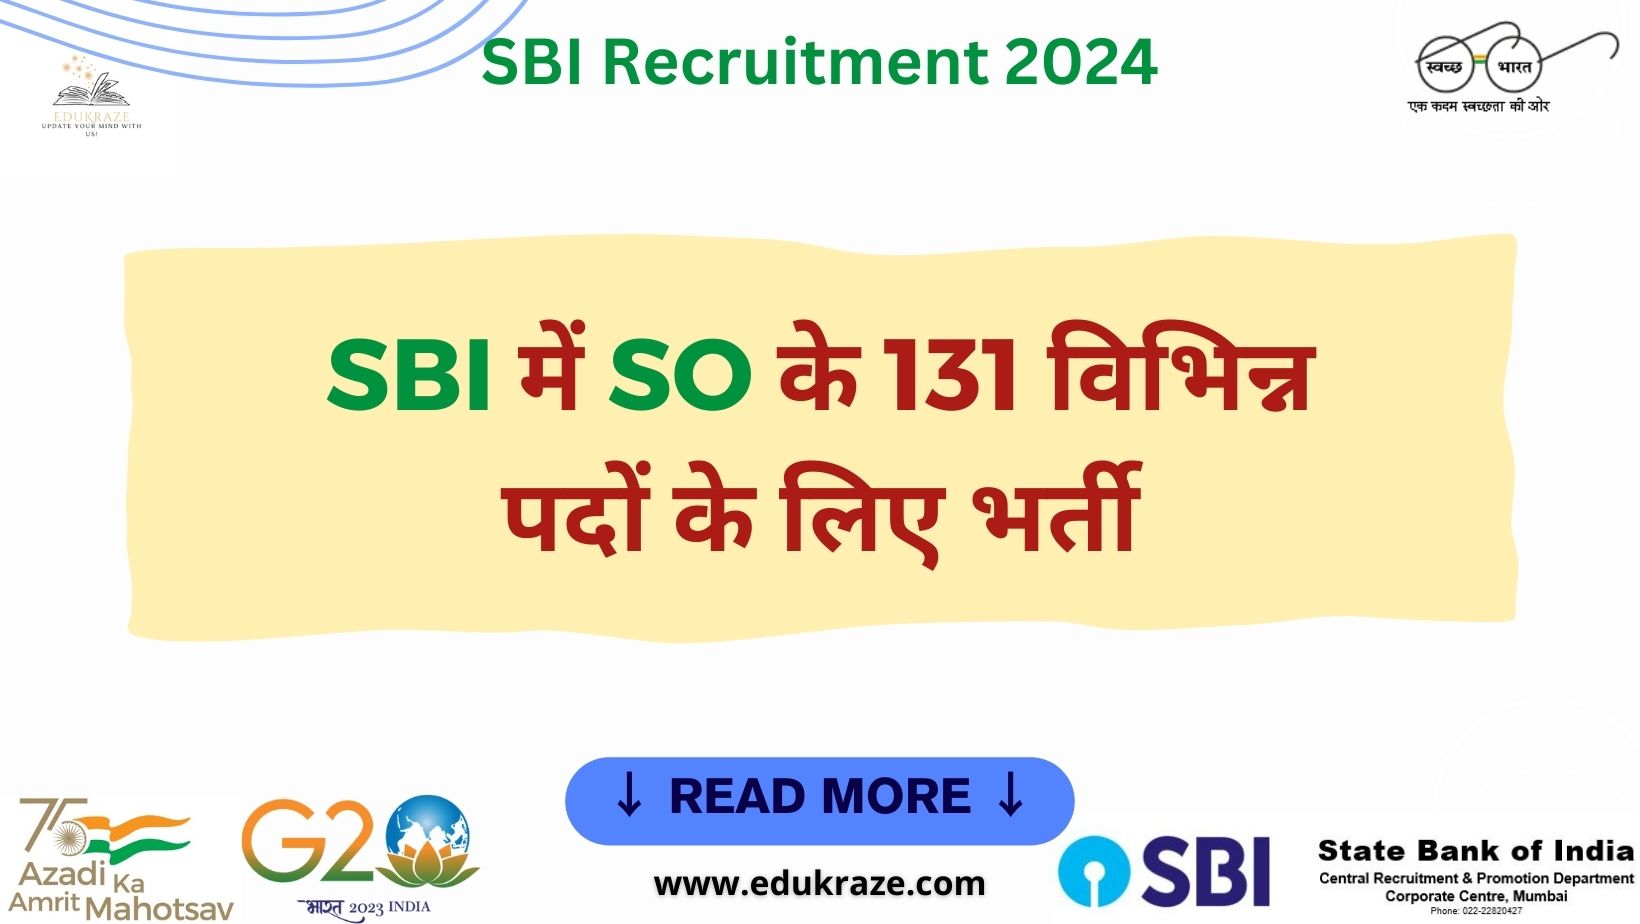 SBI Recruitment 2024 Out for 131 Posts